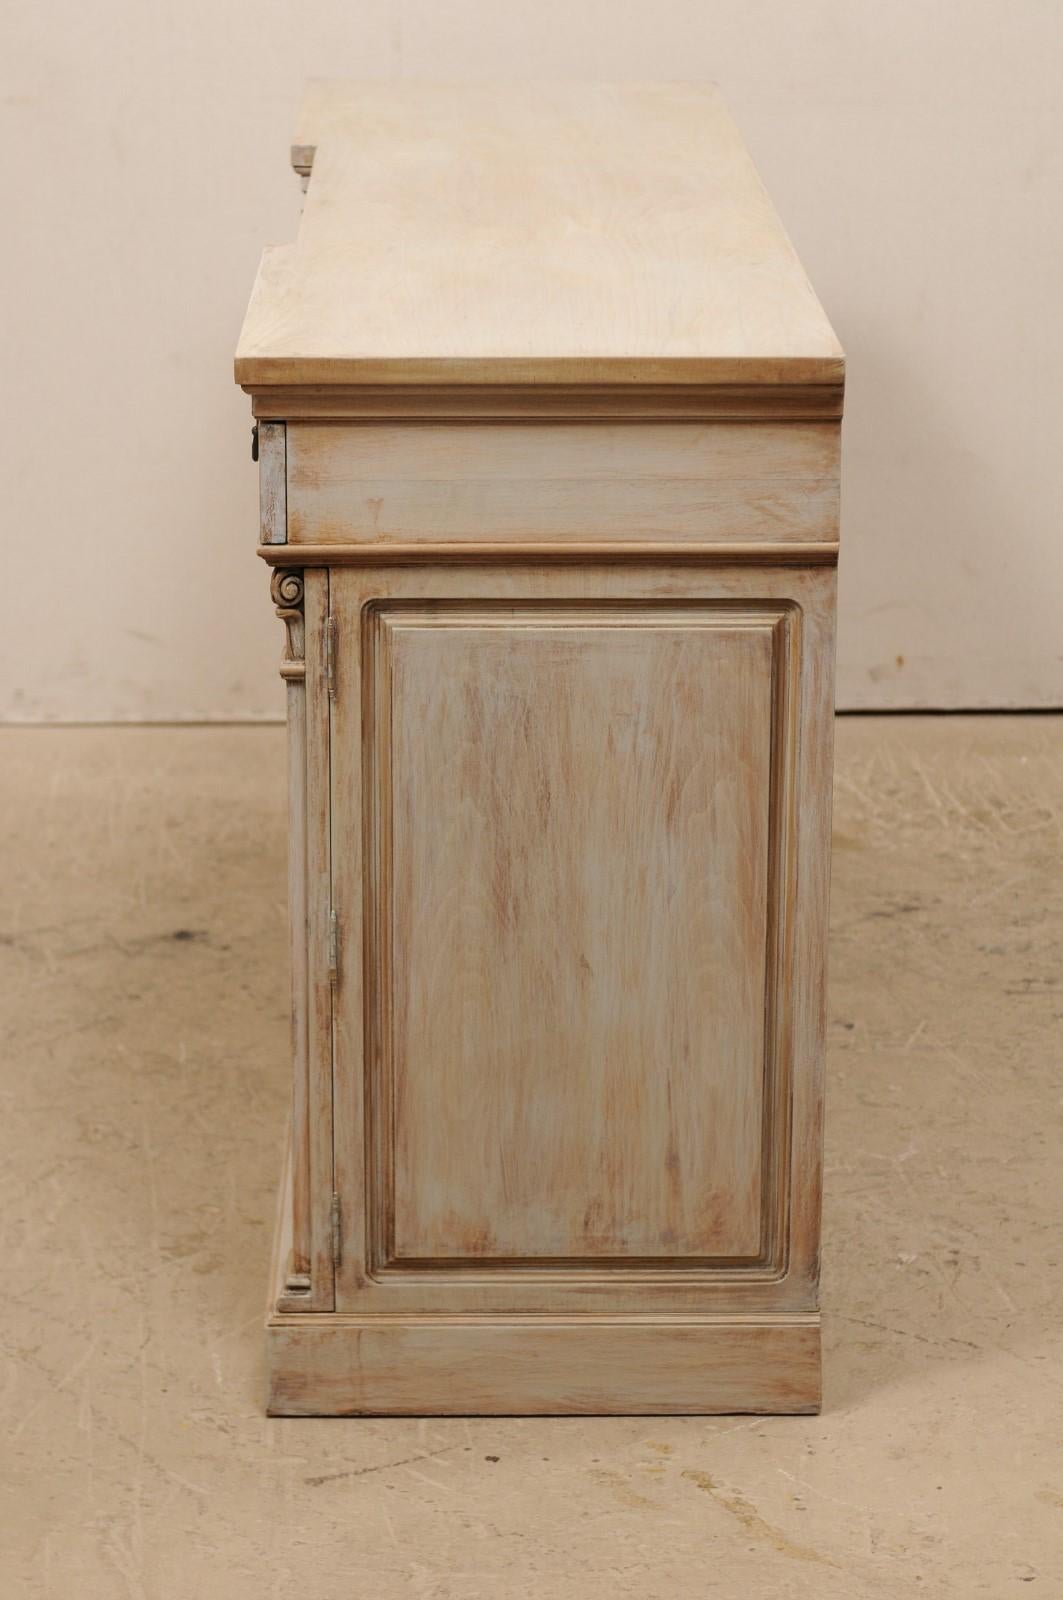 Carved A Mid-20th C. 6 Ft Long Painted Wood Buffet Cabinet w/ Corinthian Column Accents For Sale